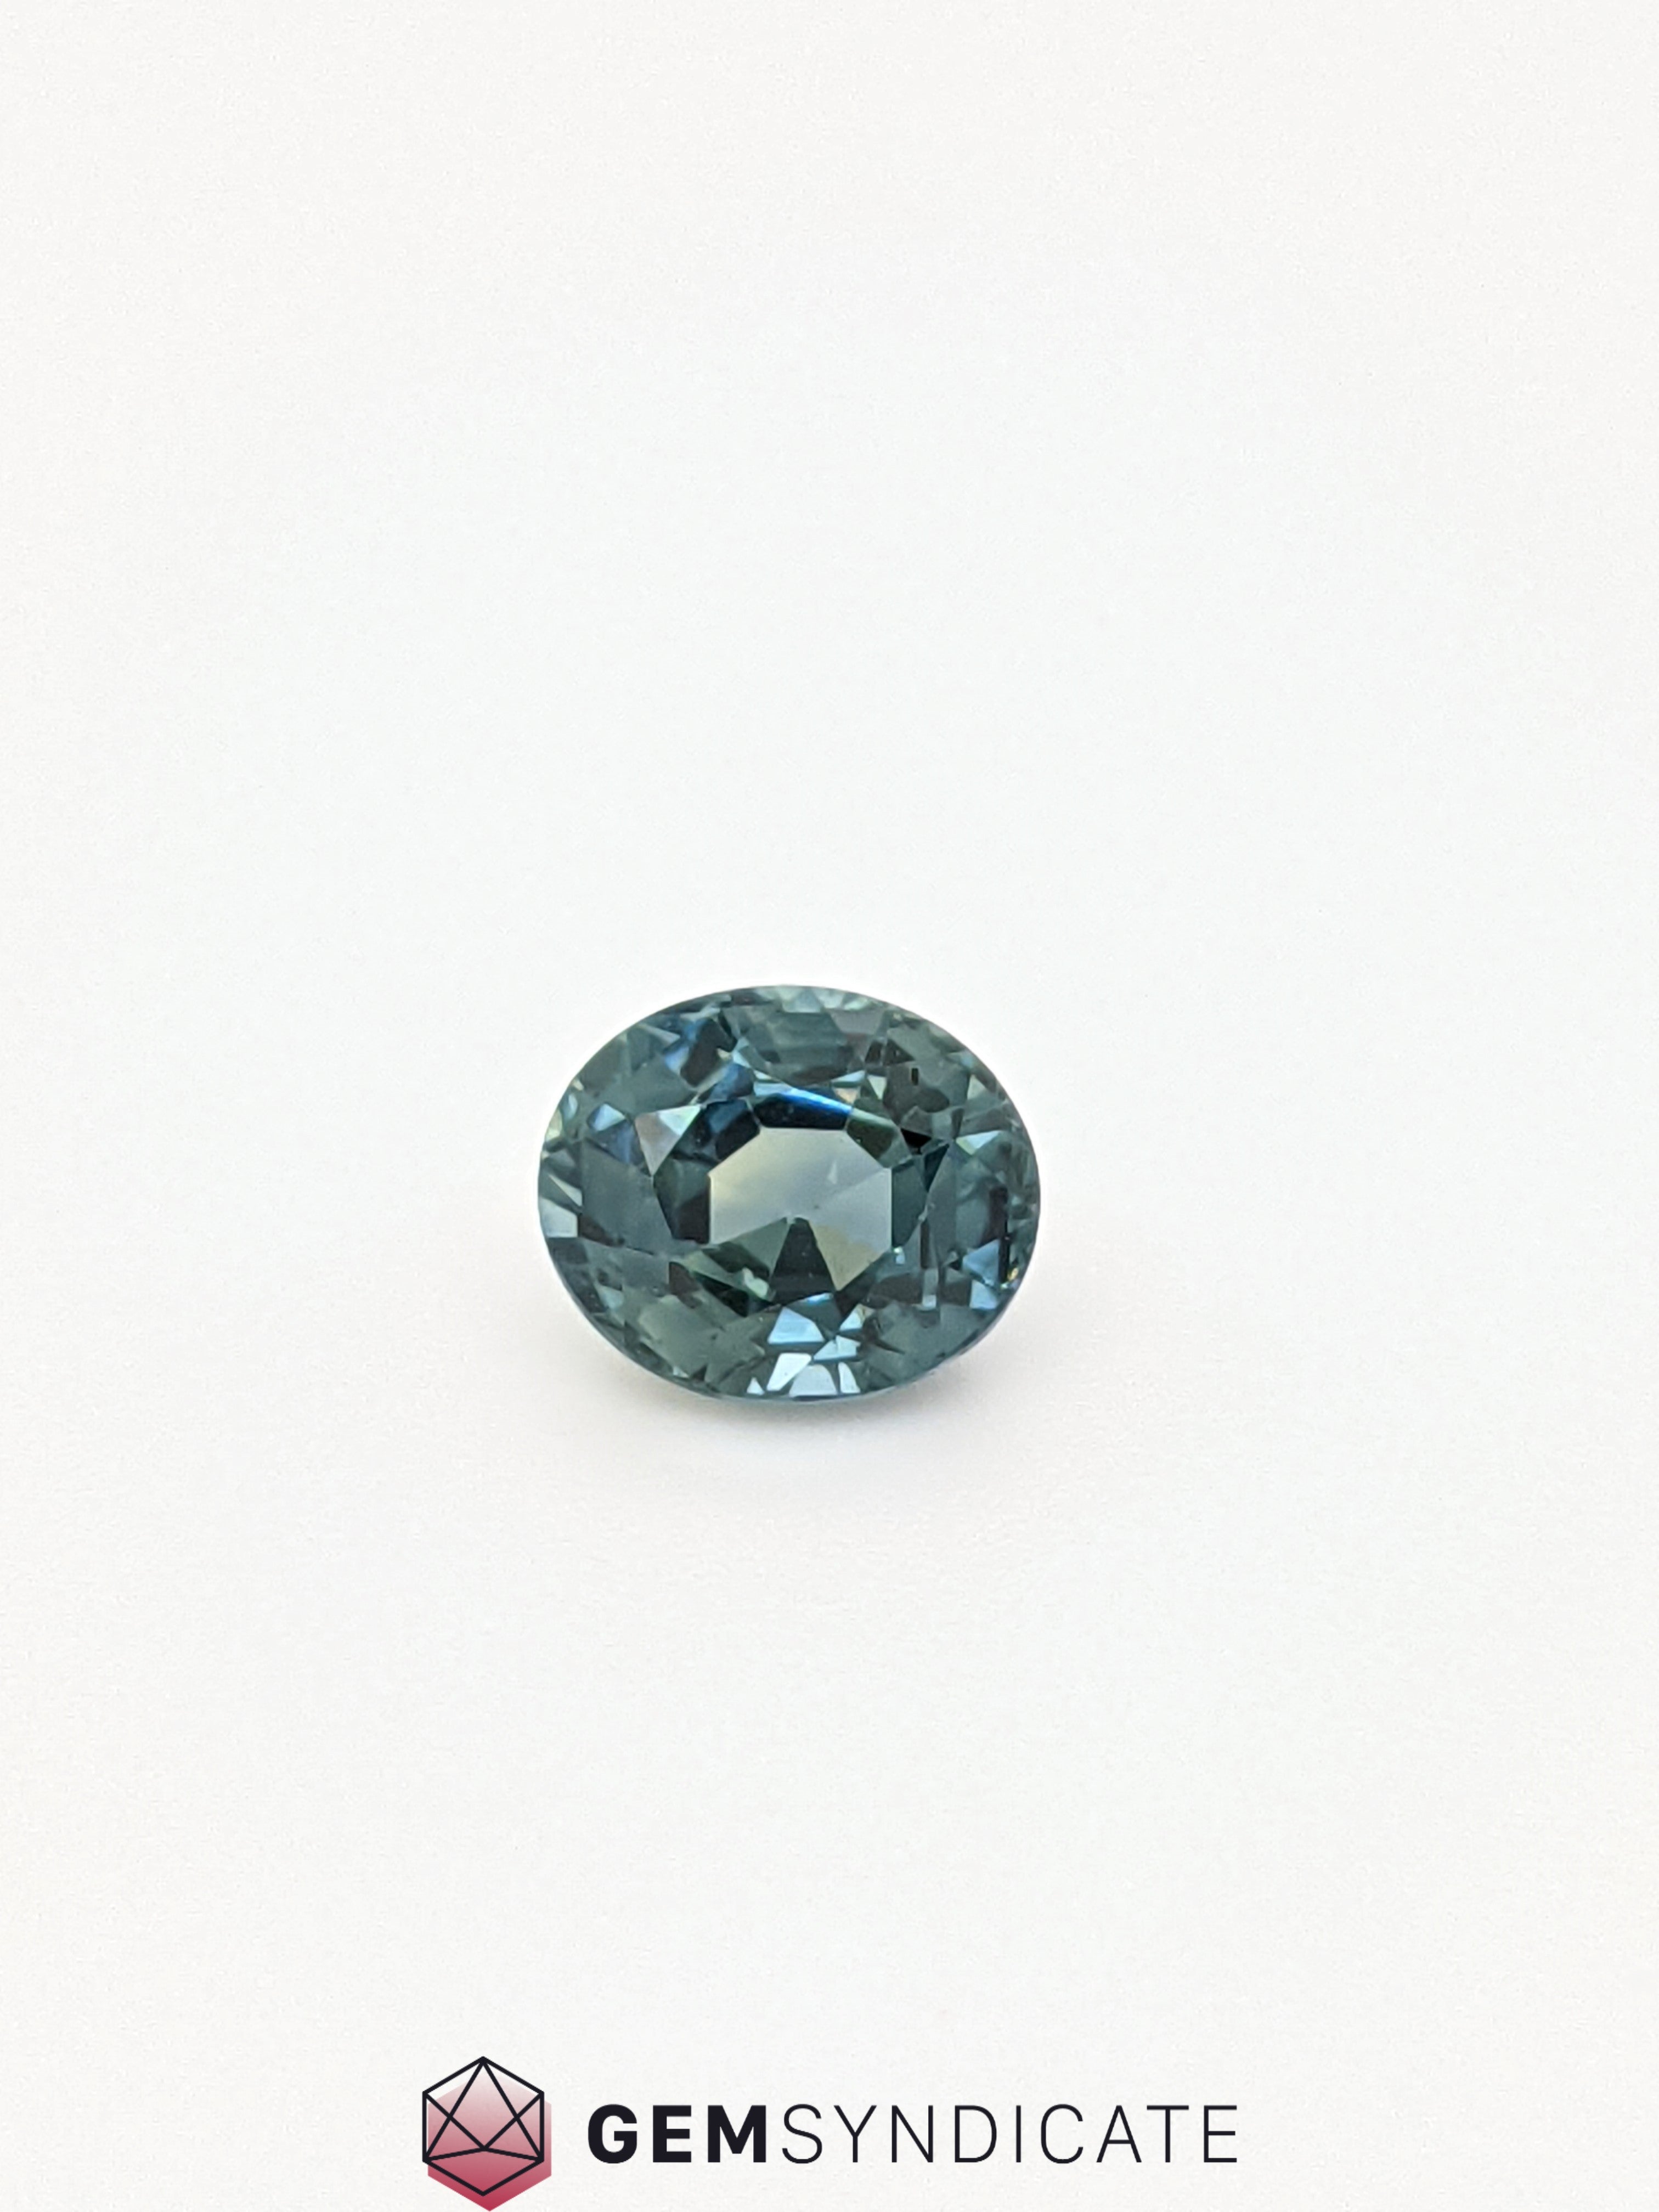 Remarkable Oval Teal Sapphire 1.32ct